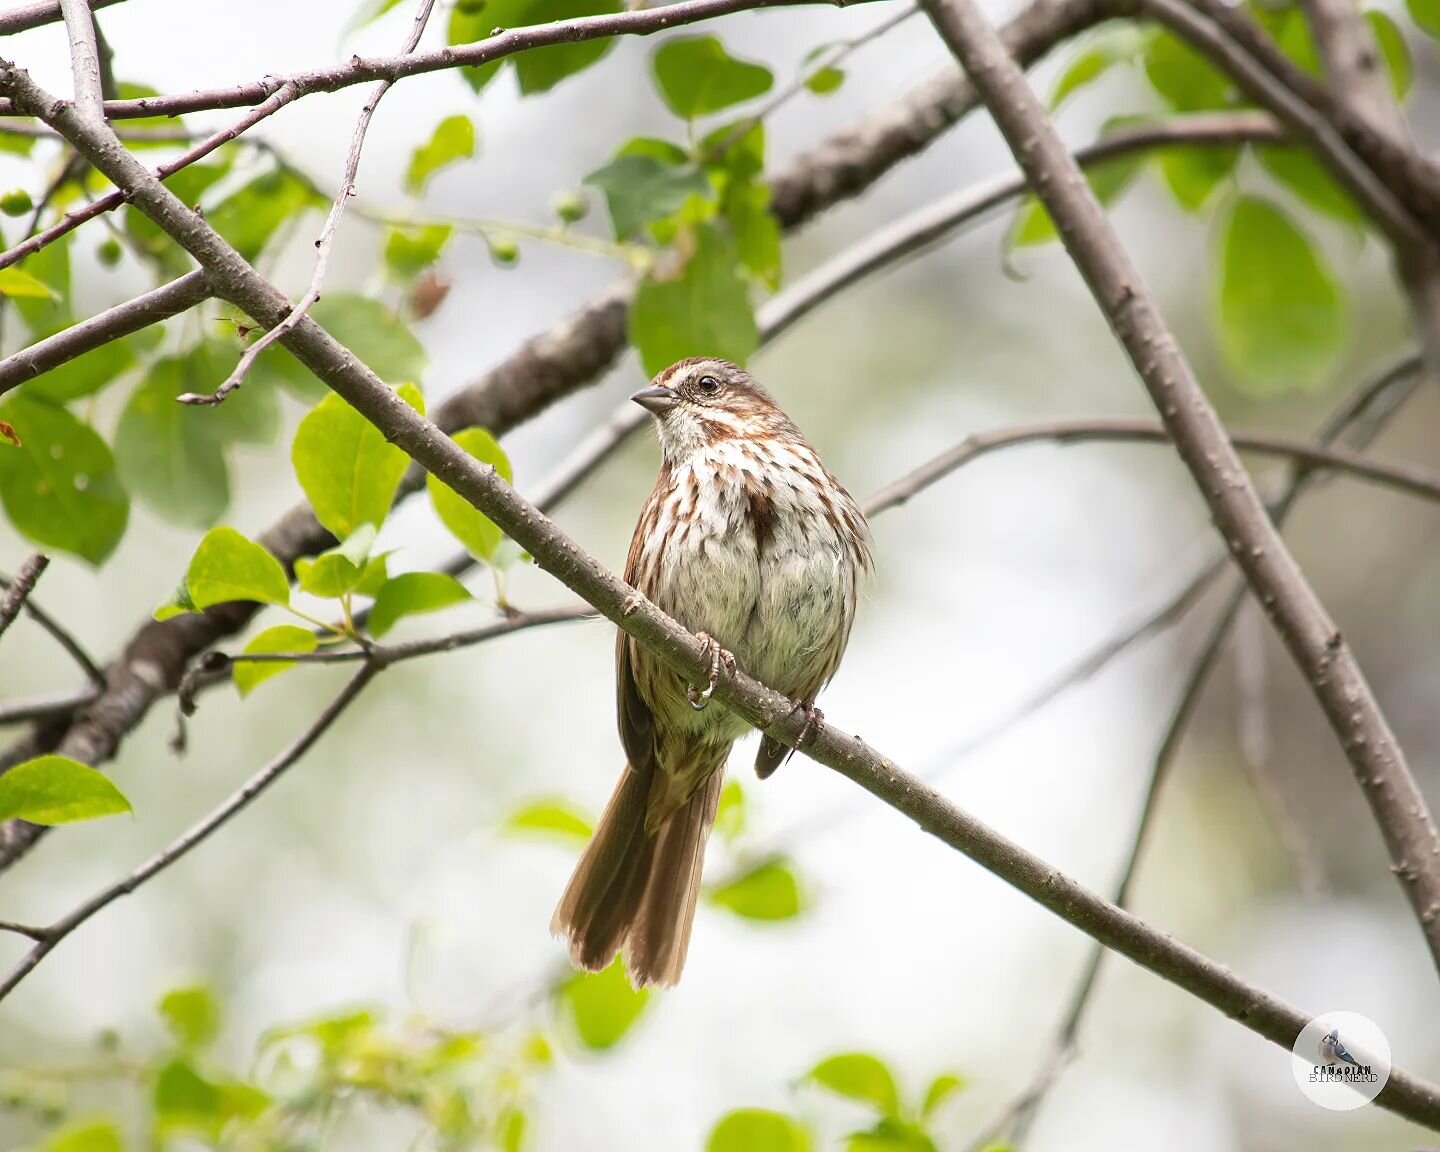 Each time we visit the summer cabin, one of the most welcoming sounds is hearing the Song Sparrows.  Doesn't the picture make you feel like you're at a cozy cottage in the summer?
#songsparrow #sparrow #birdsofbritishcolumbia #birdphotography #birdin